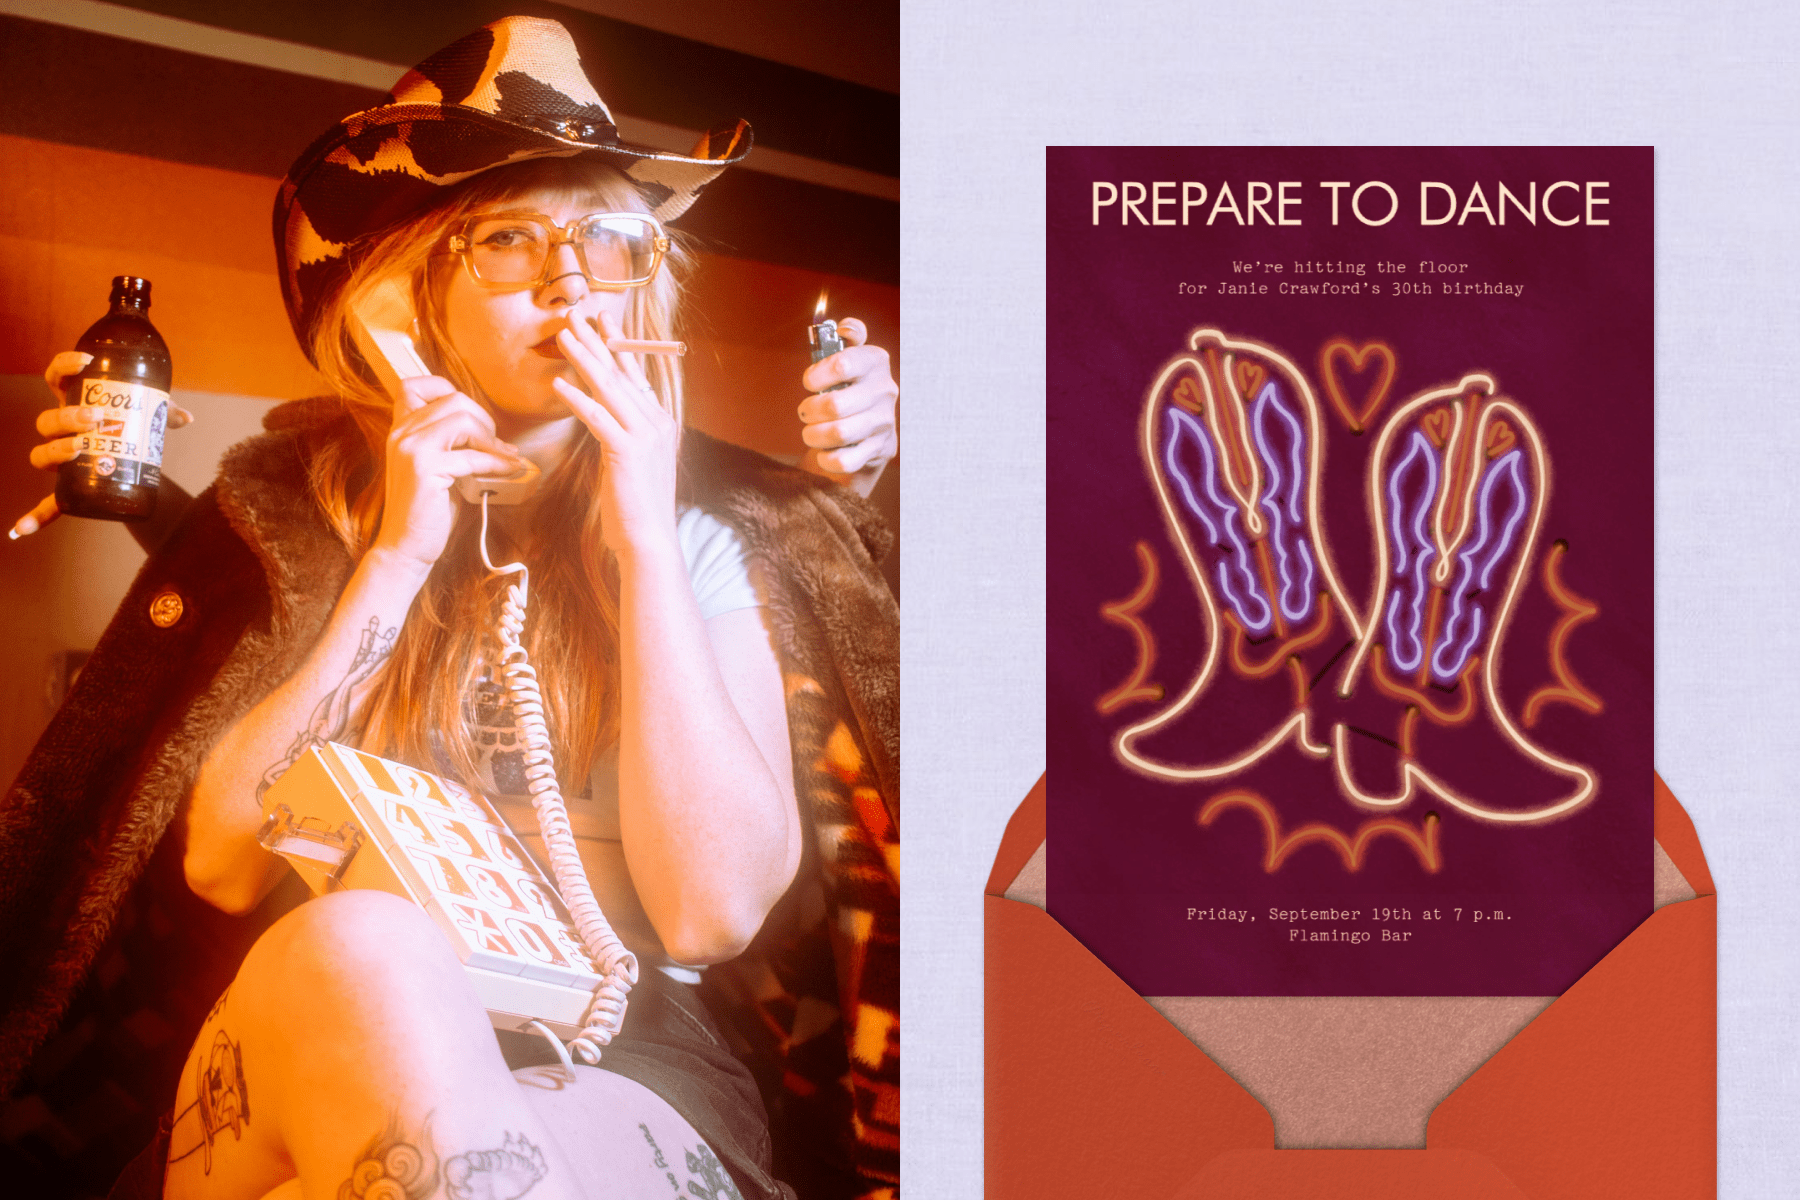 A woman decked out in cowgirl attire holding a landline telephone and smoking a cigarette; A 30th birthday invitation with neon cowboy boots.